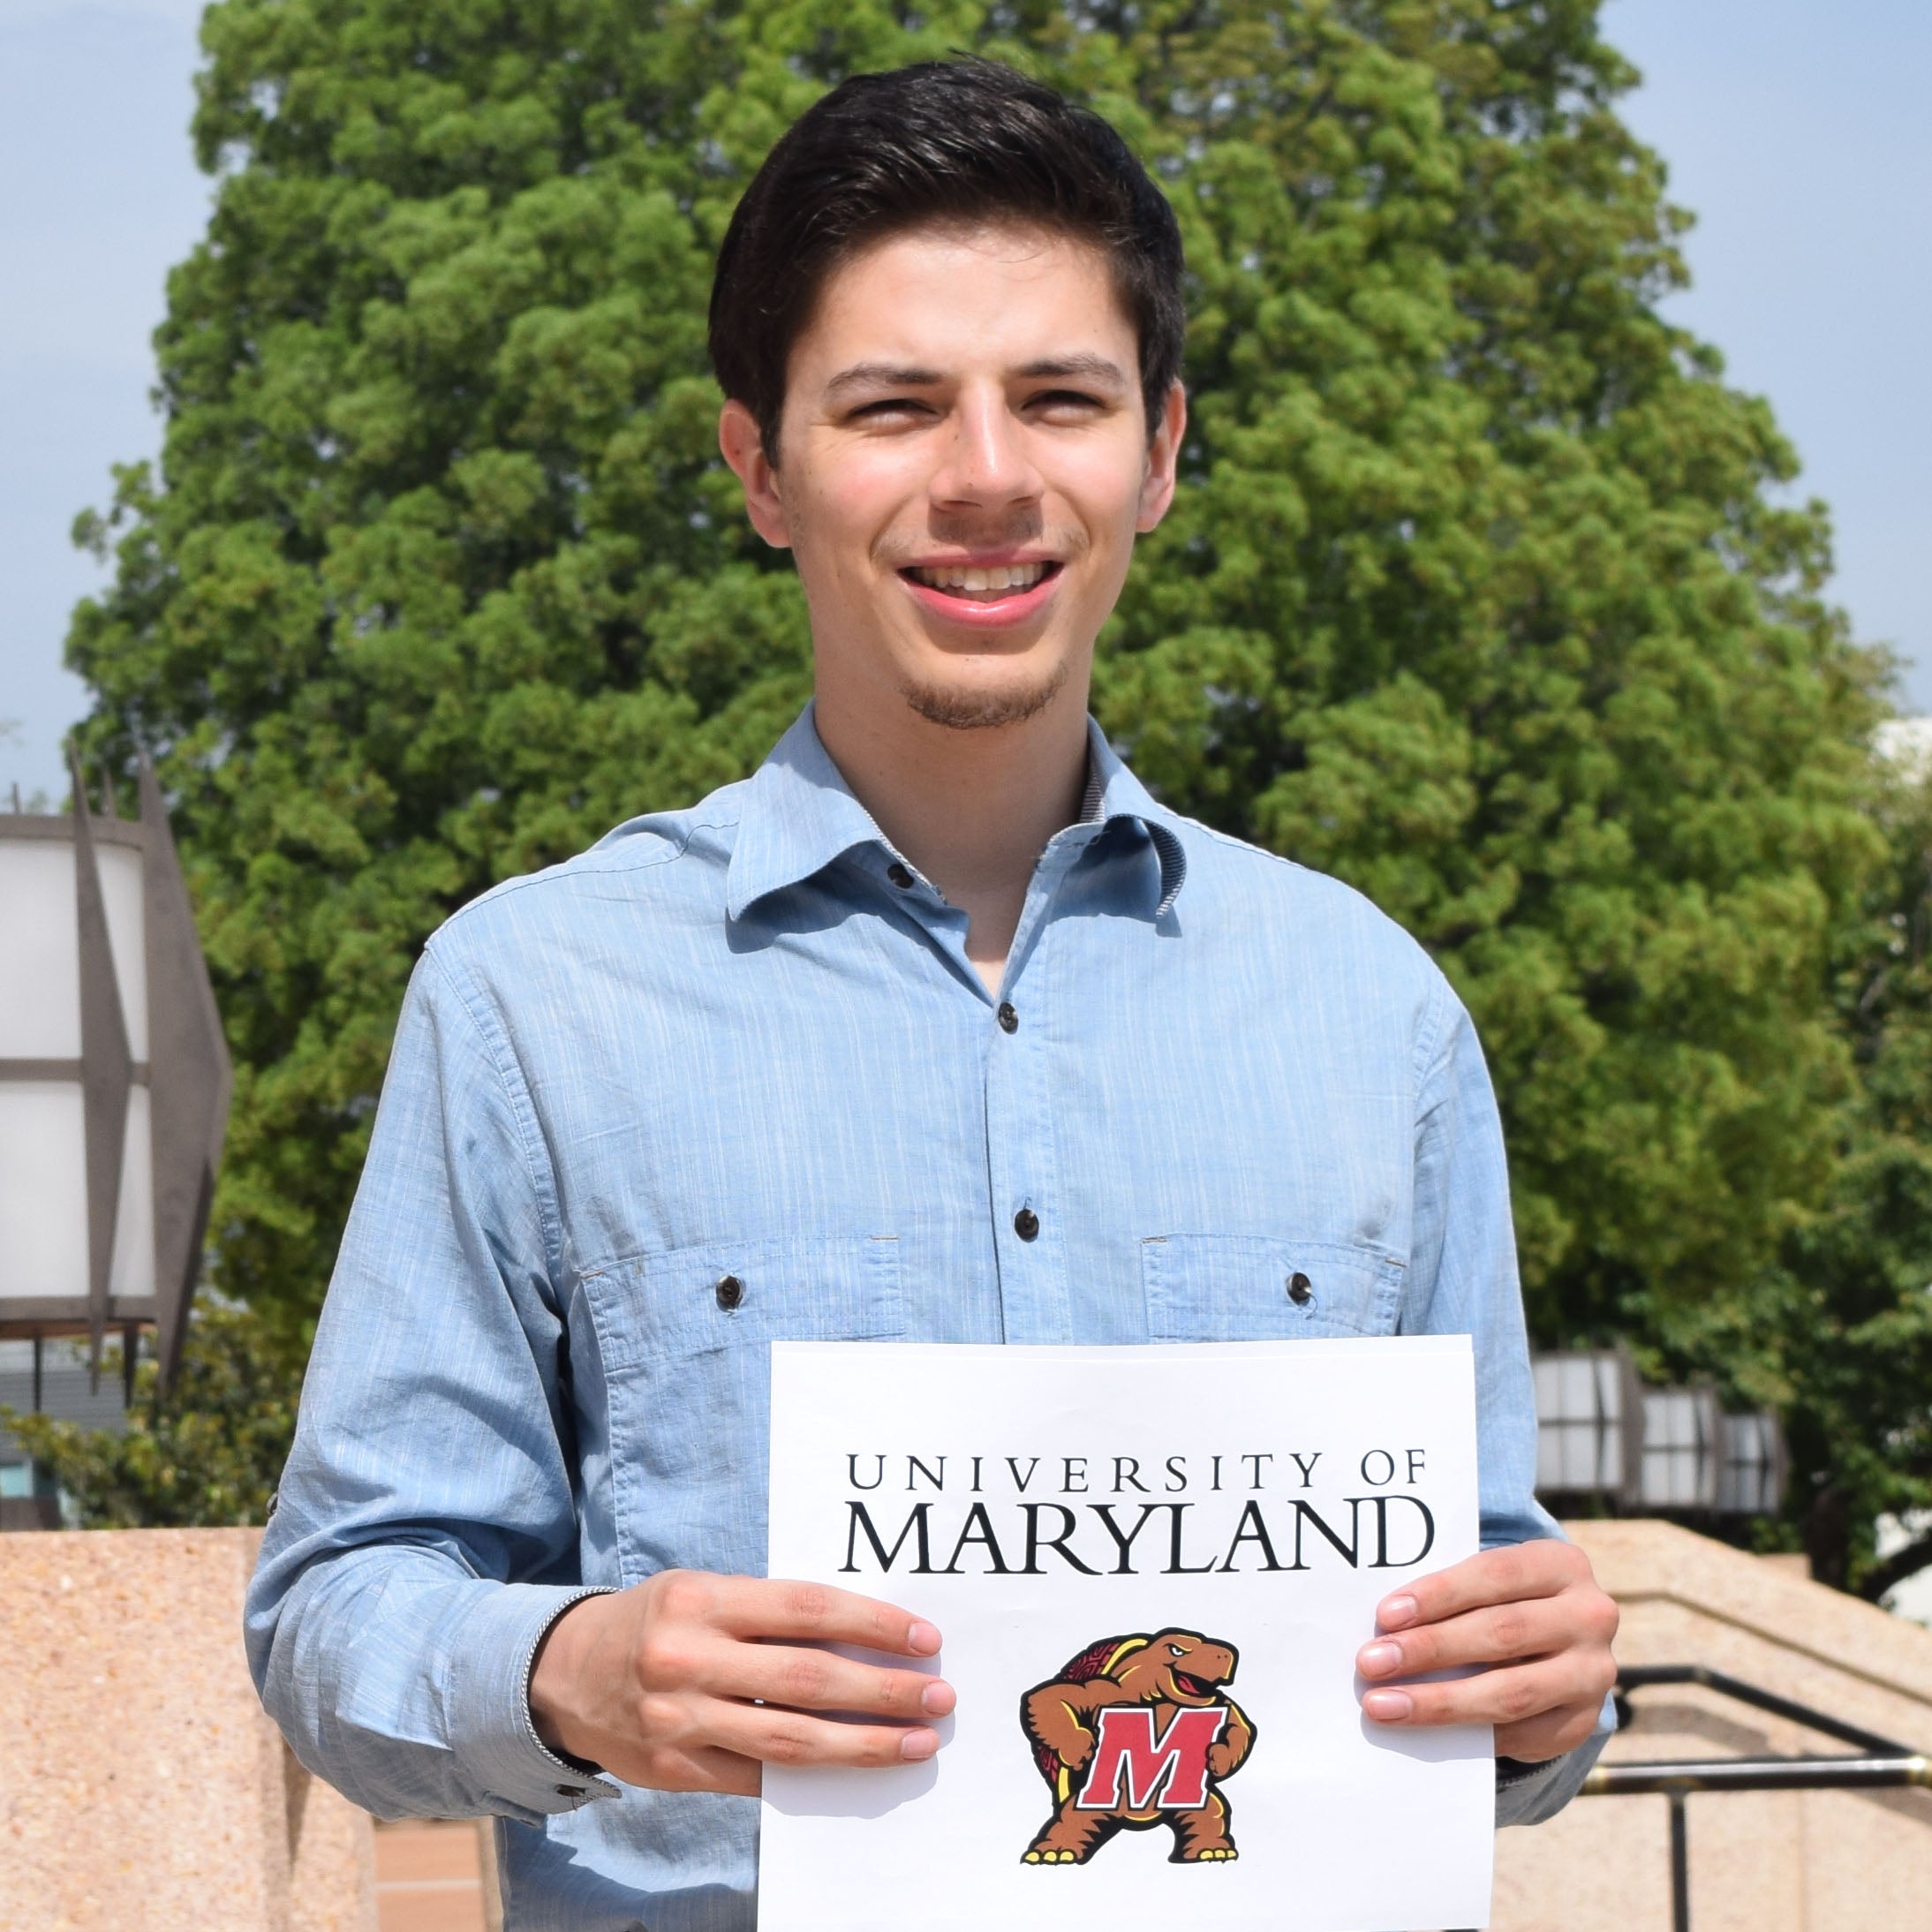 Richard holds sign with showing his graduate school of choice, the University of Maryland